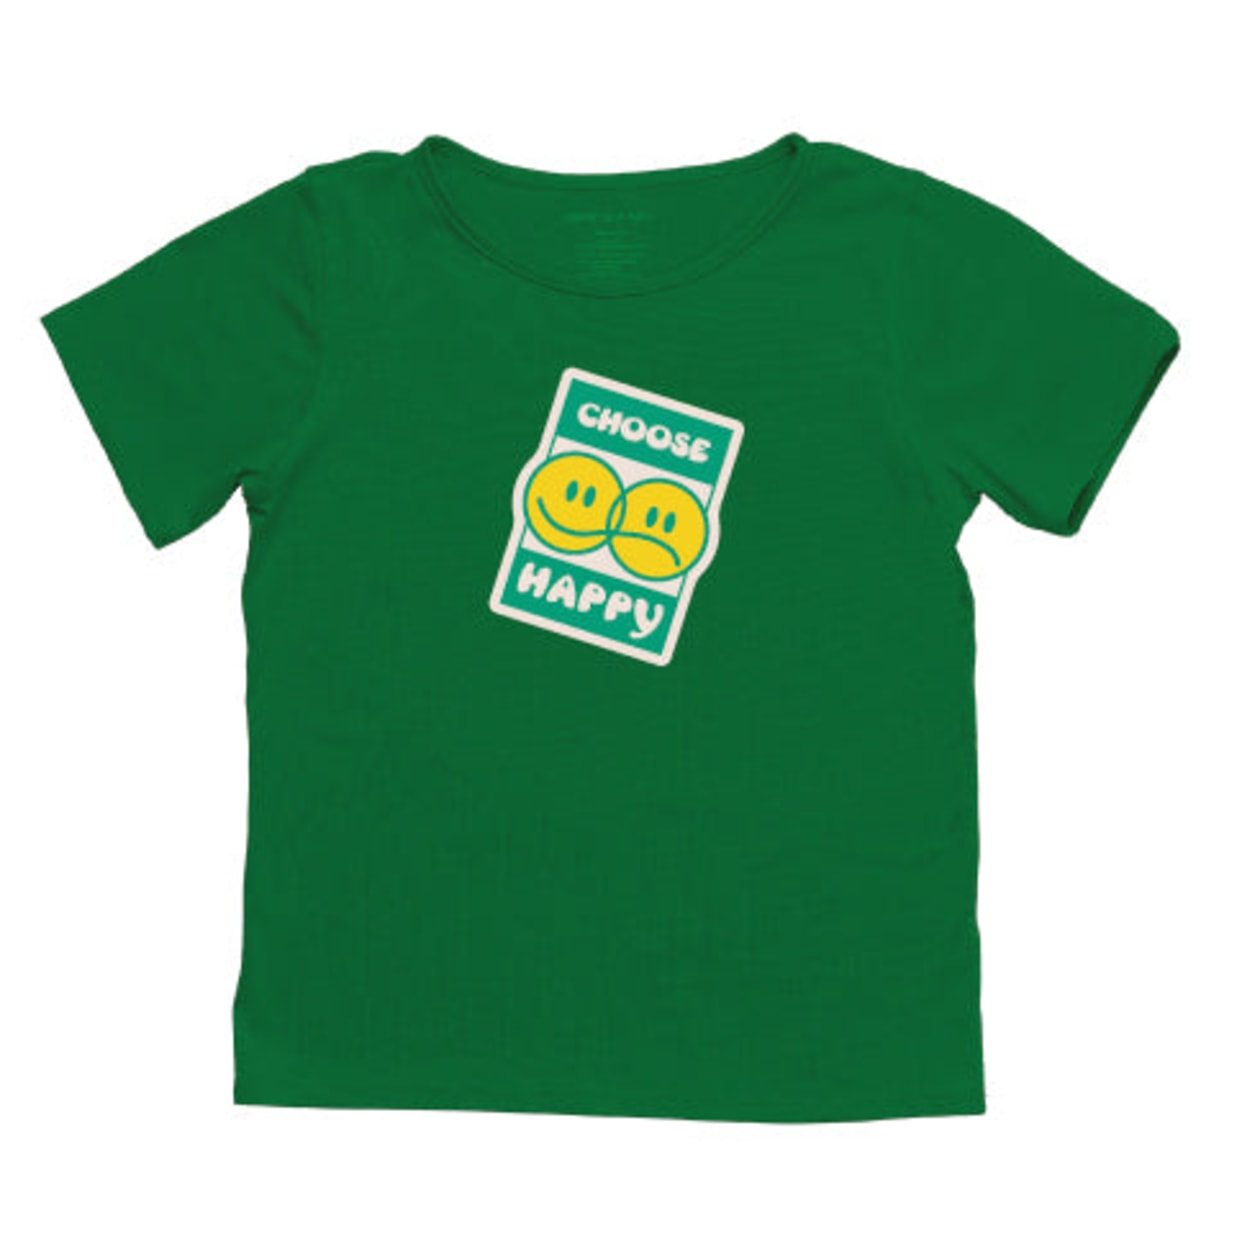 The Everyday Sensory Friendly Tee: Choose Happy - Size: 2T